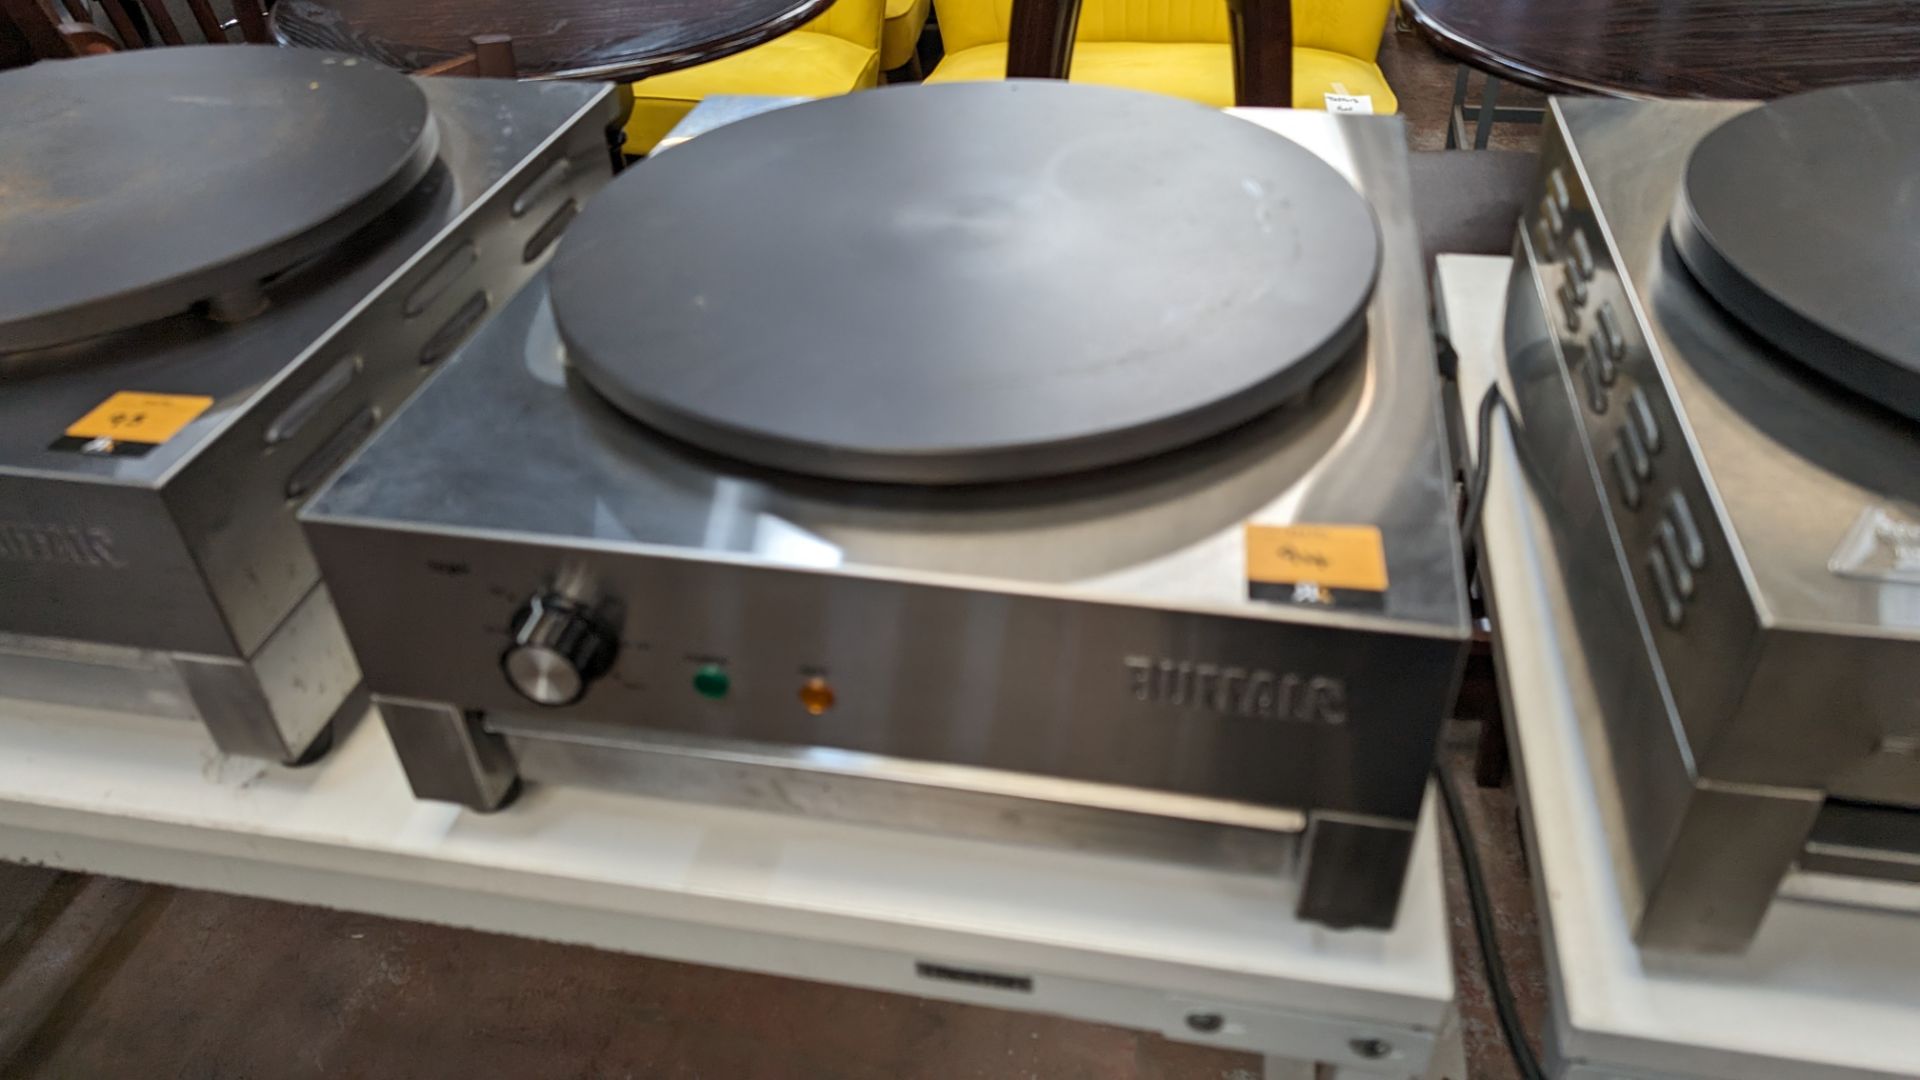 Buffalo stainless steel commercial crepe maker, model CT931 - Image 4 of 4